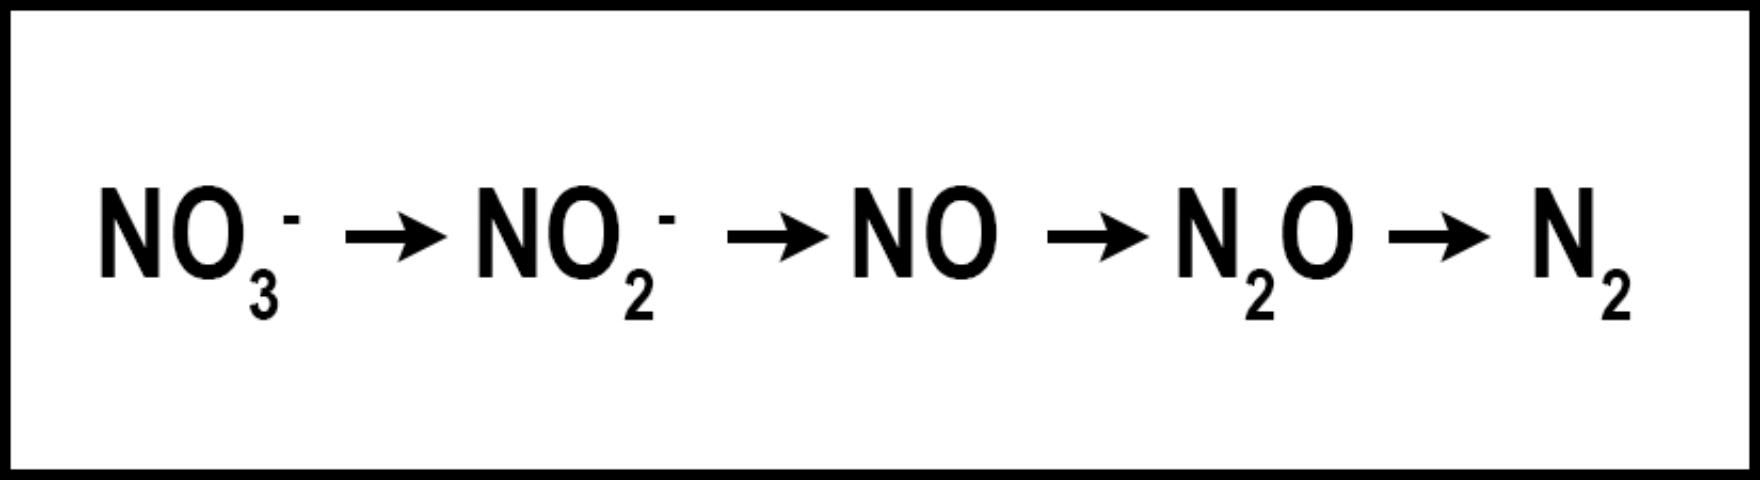 Figure 3. Denitrification - NO3-N is subject to reduction by soil microbes, leading to N2.